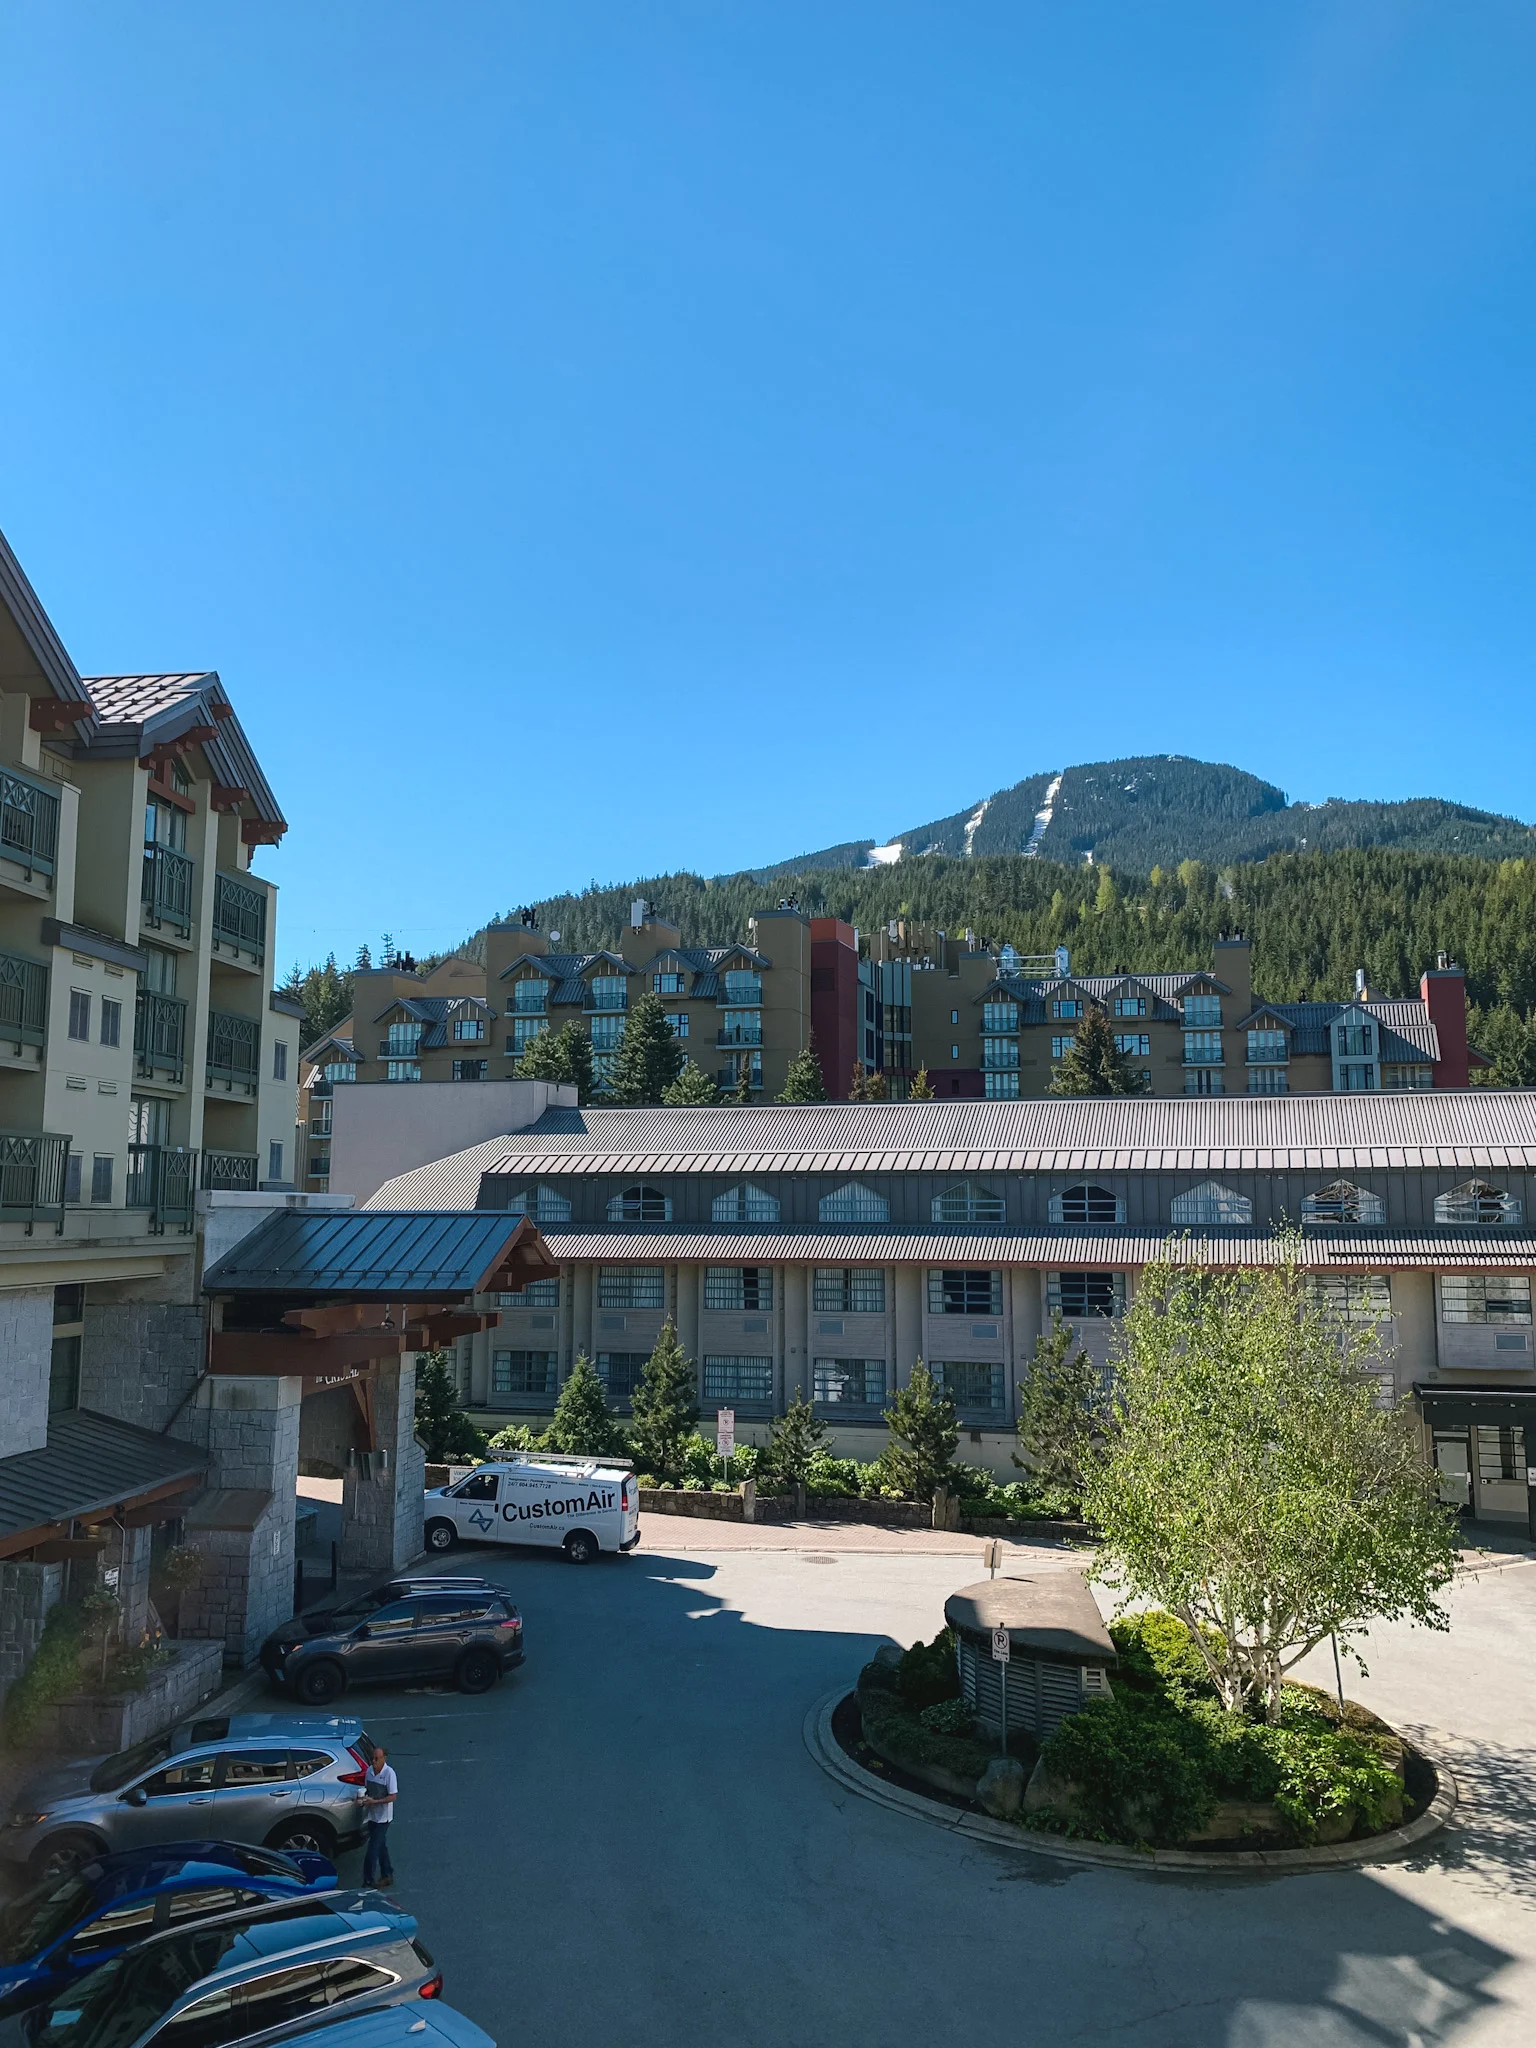 Terrace at the Adara Hotel in Whistler, British Columbia